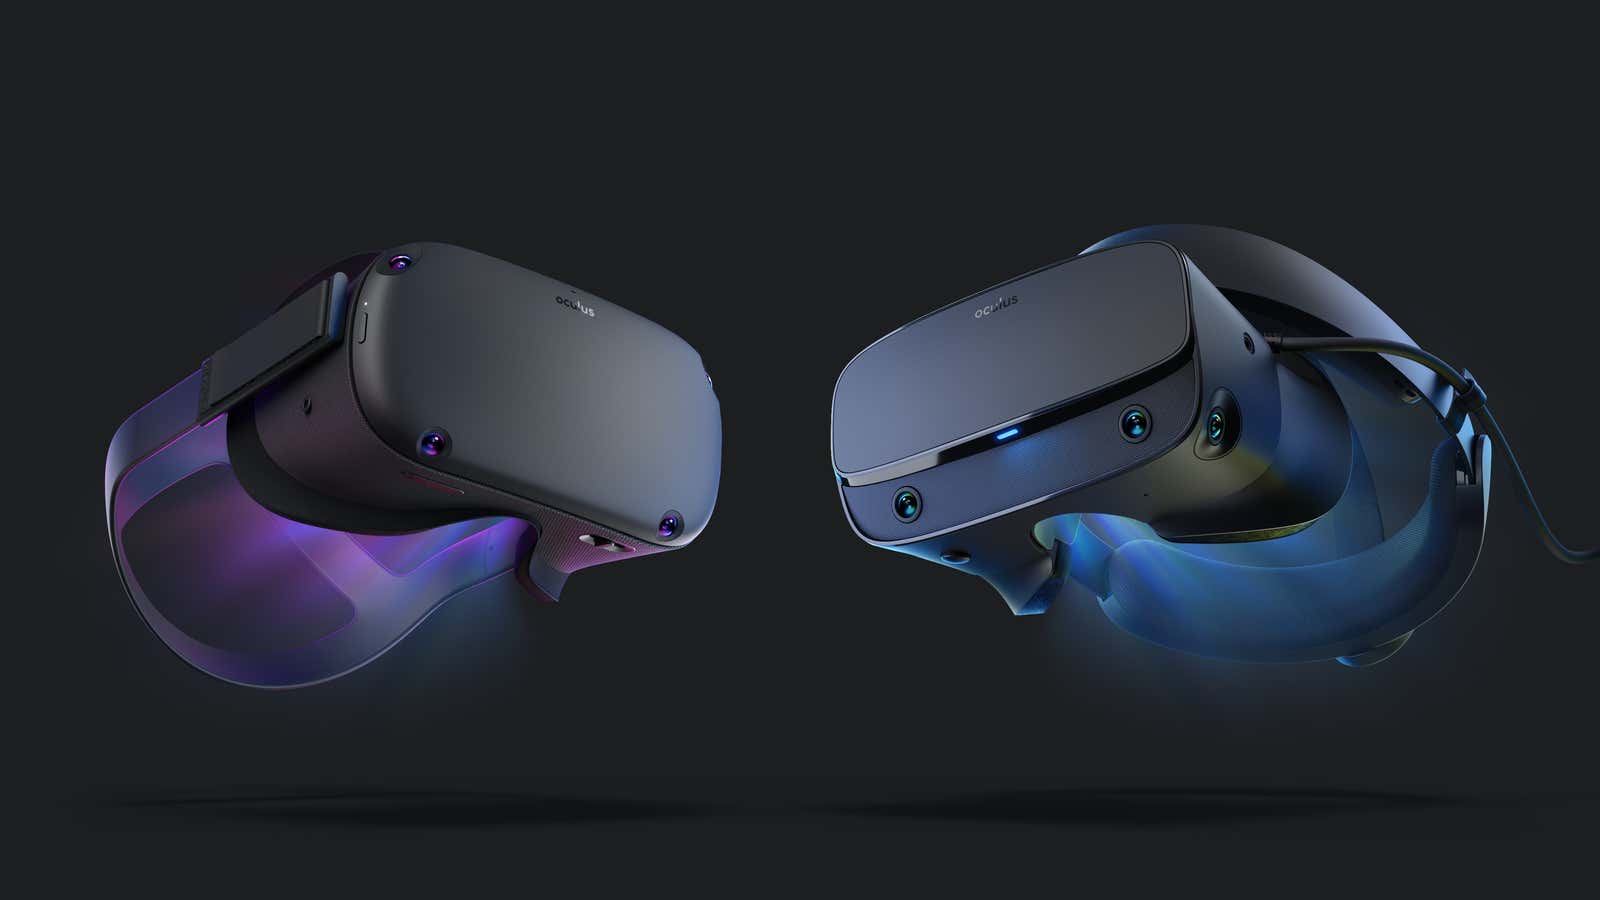 The Oculus Quest and Rift S virtual reality headsets.